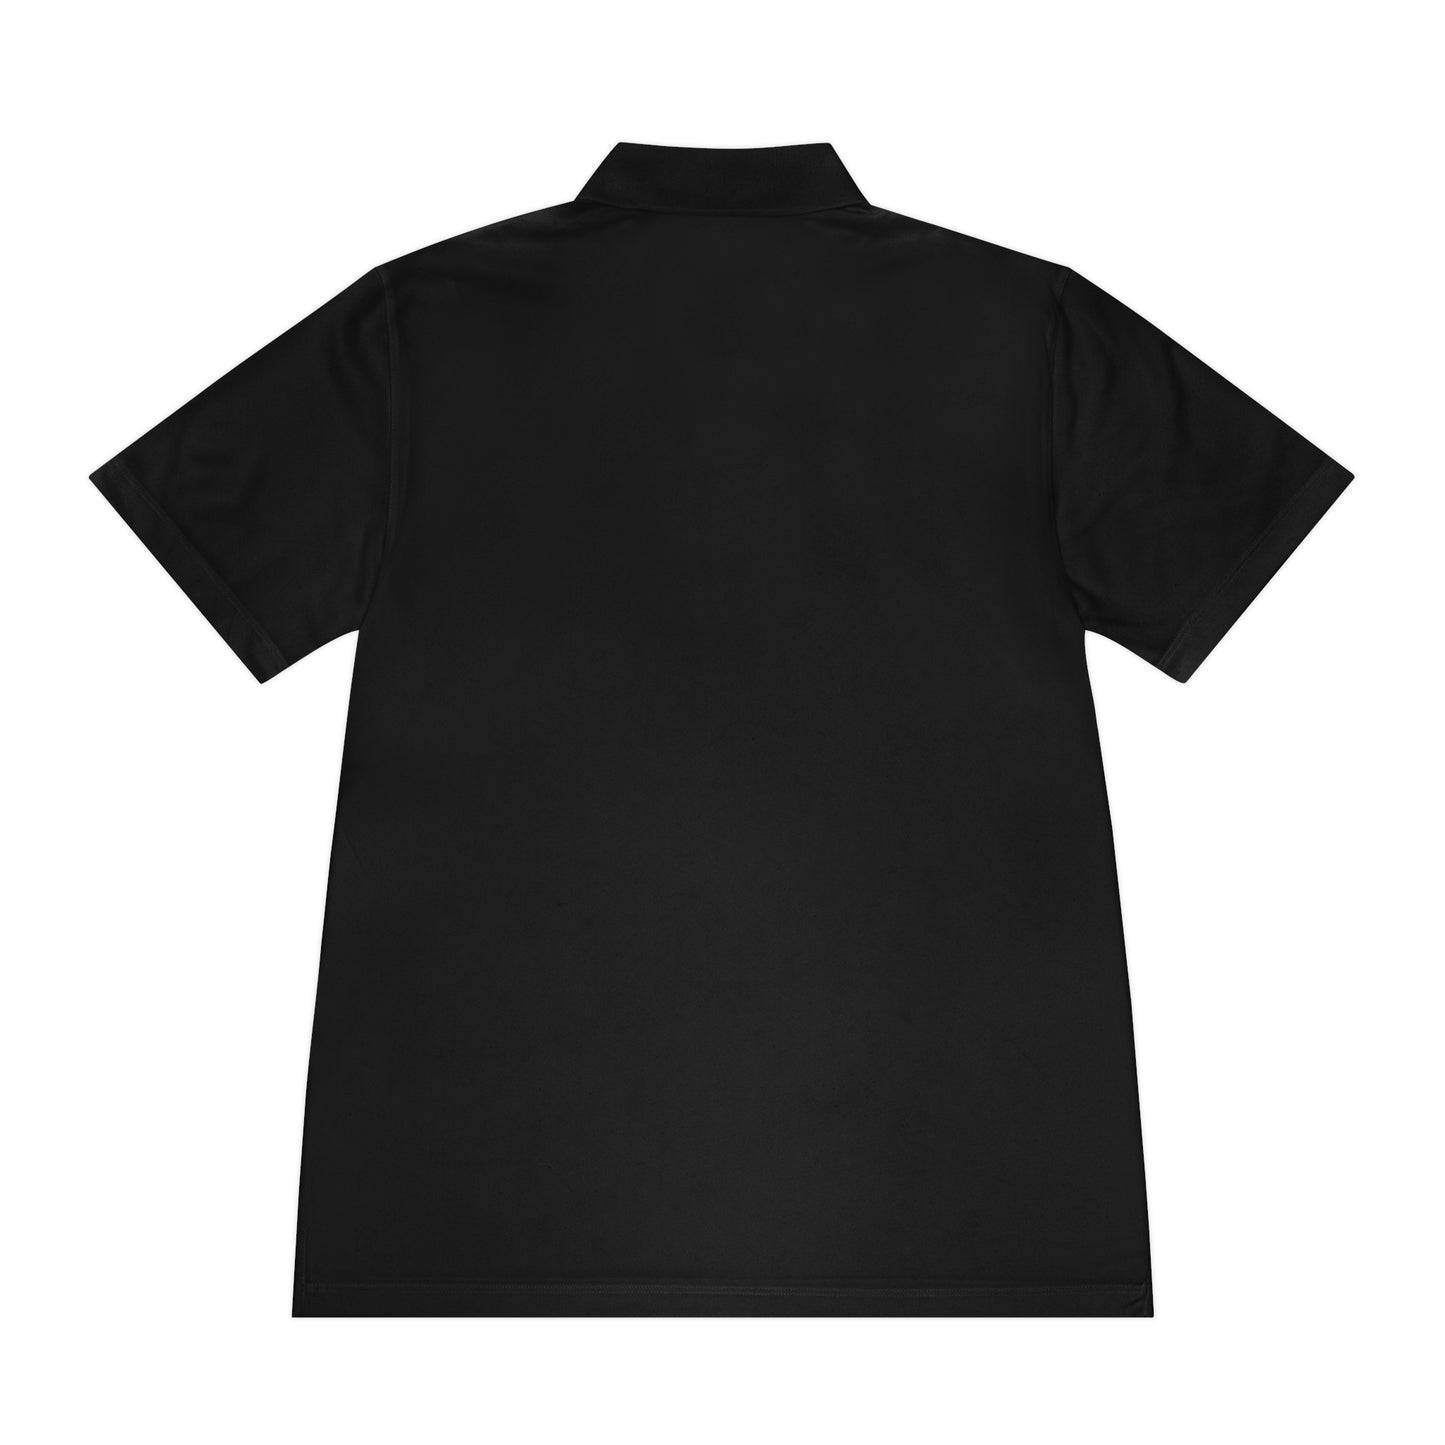 Sport Polo Shirt | Ohio Rugby Referee Society